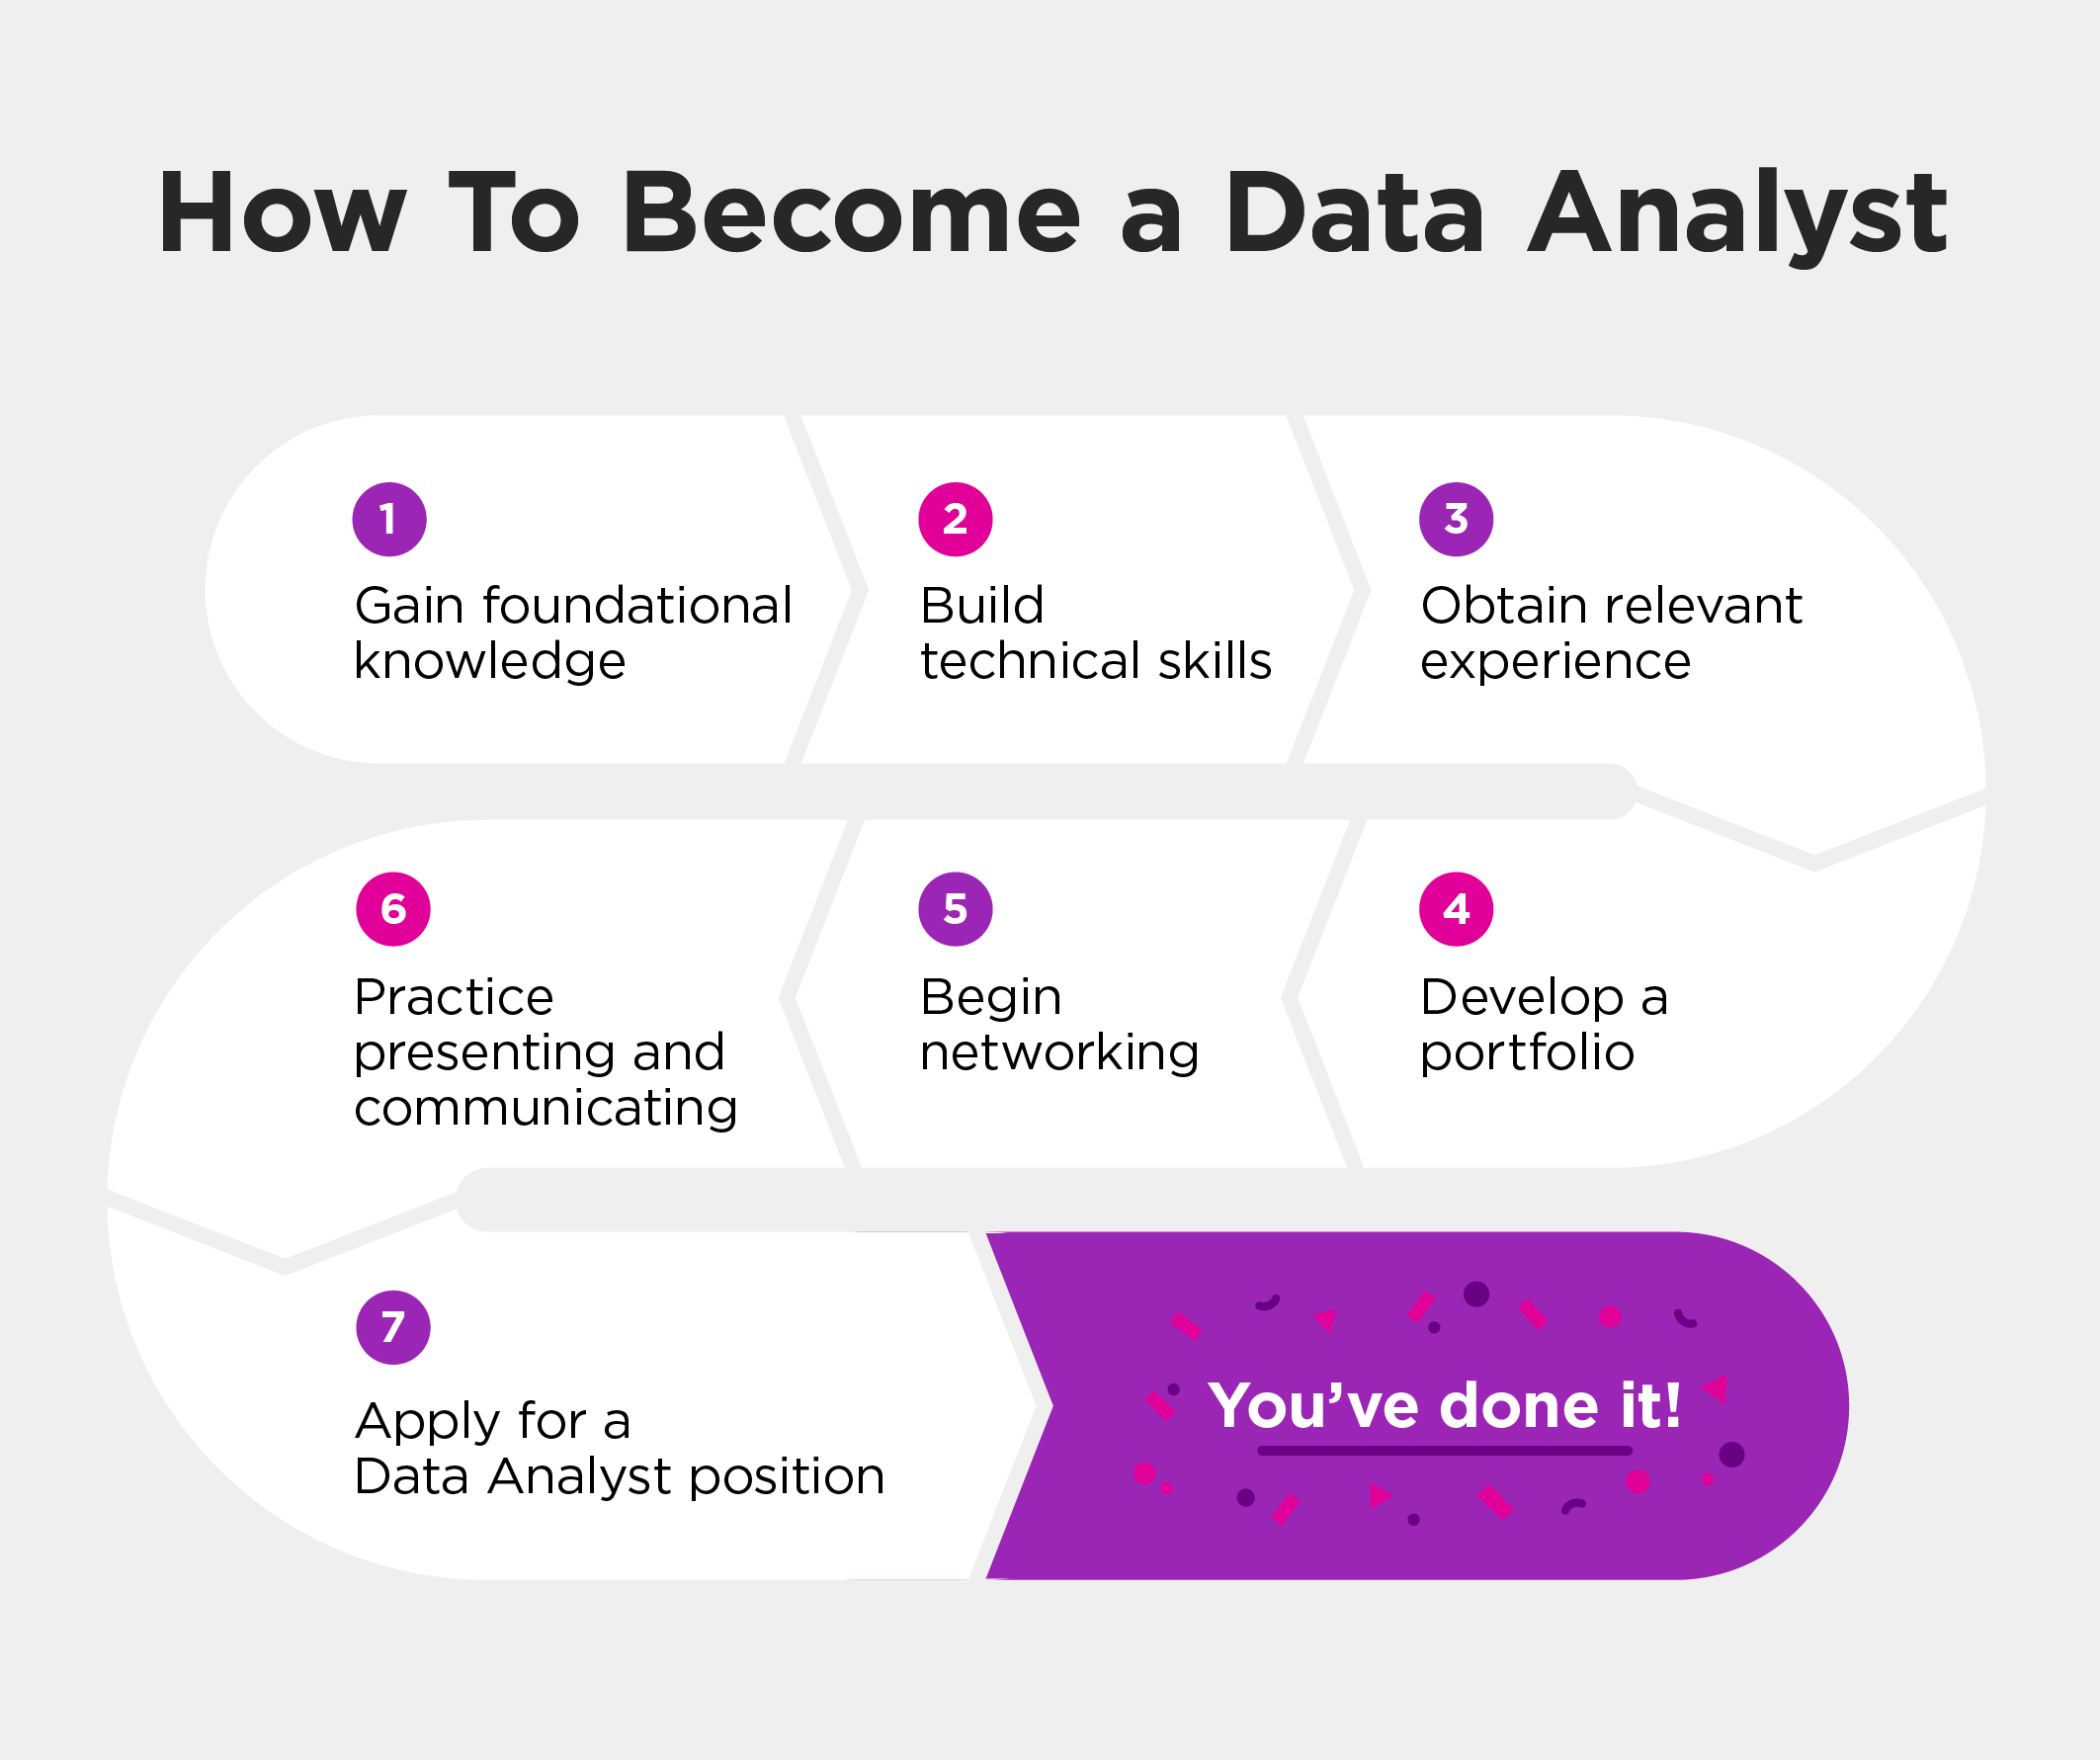 Map covers the basic steps to becoming a data analyst.